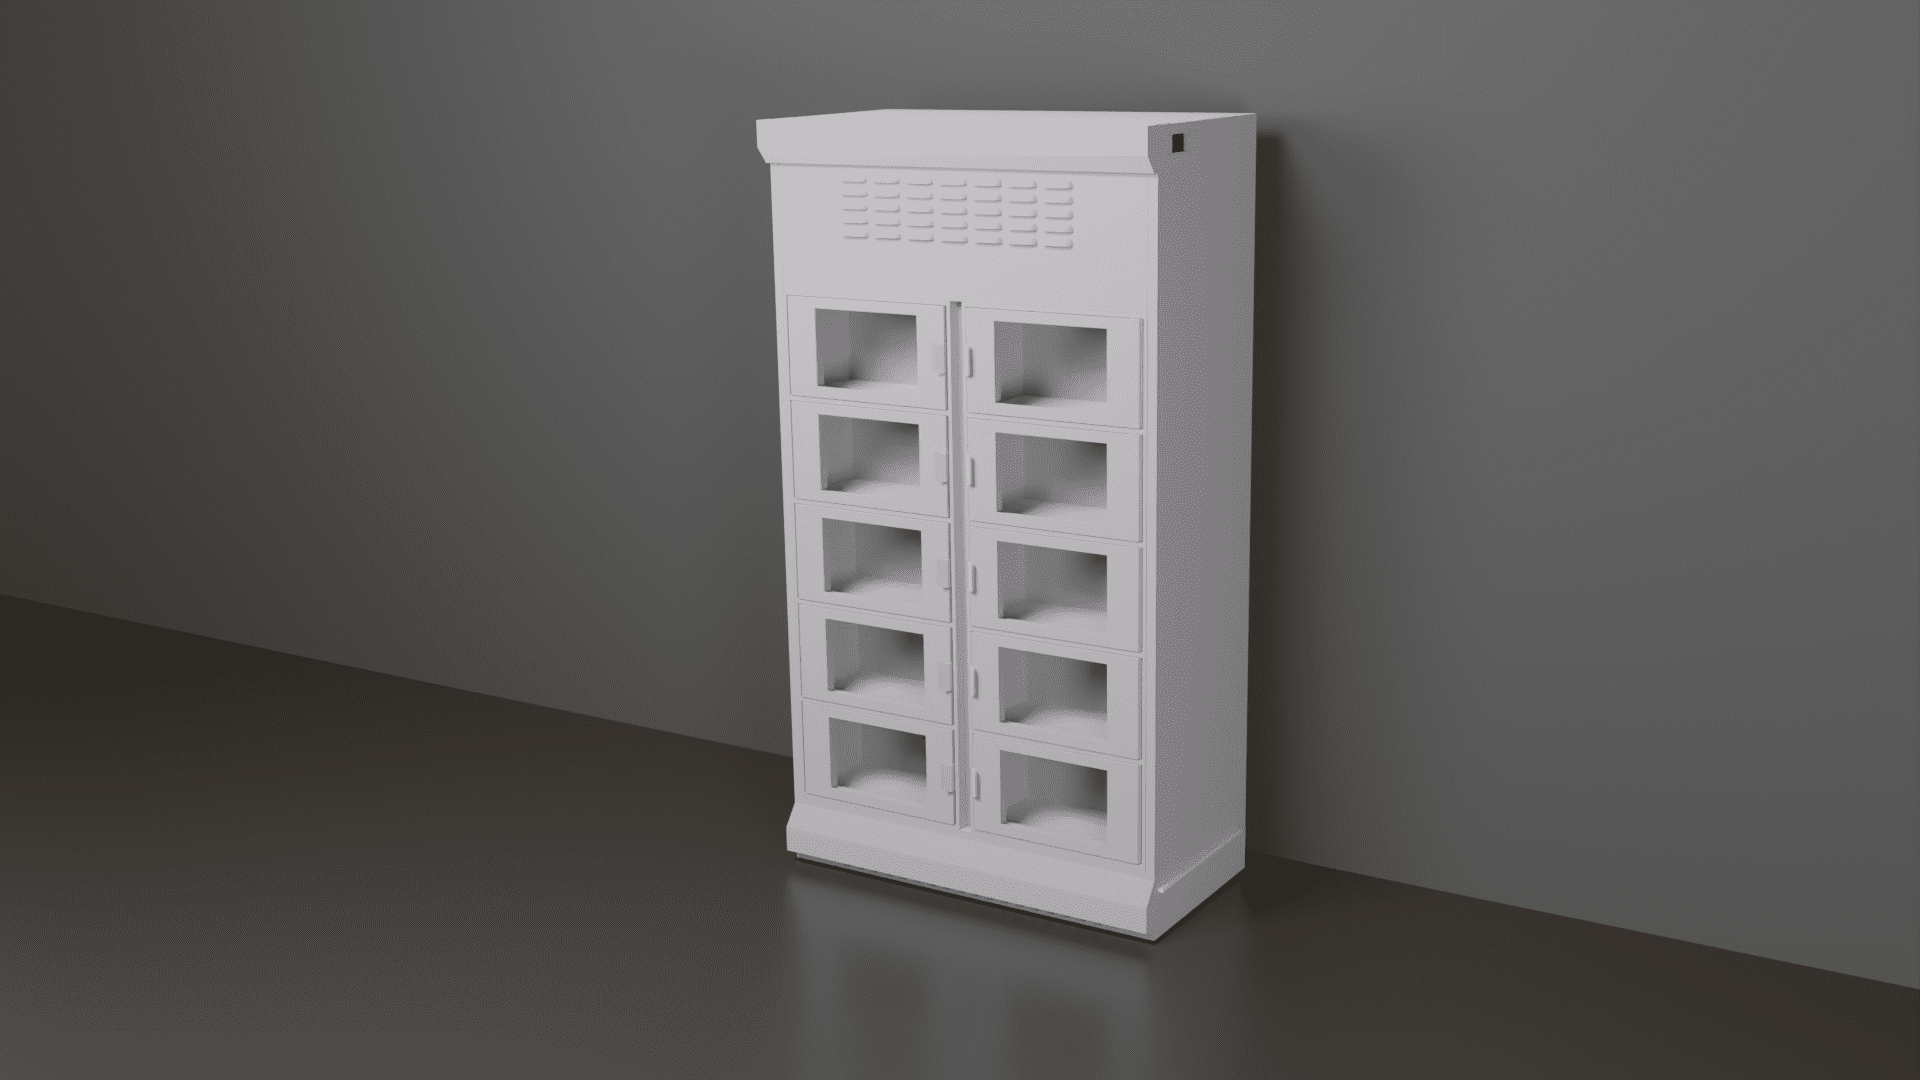 Panasonic - Temperature Controlled Delivery Cabinets